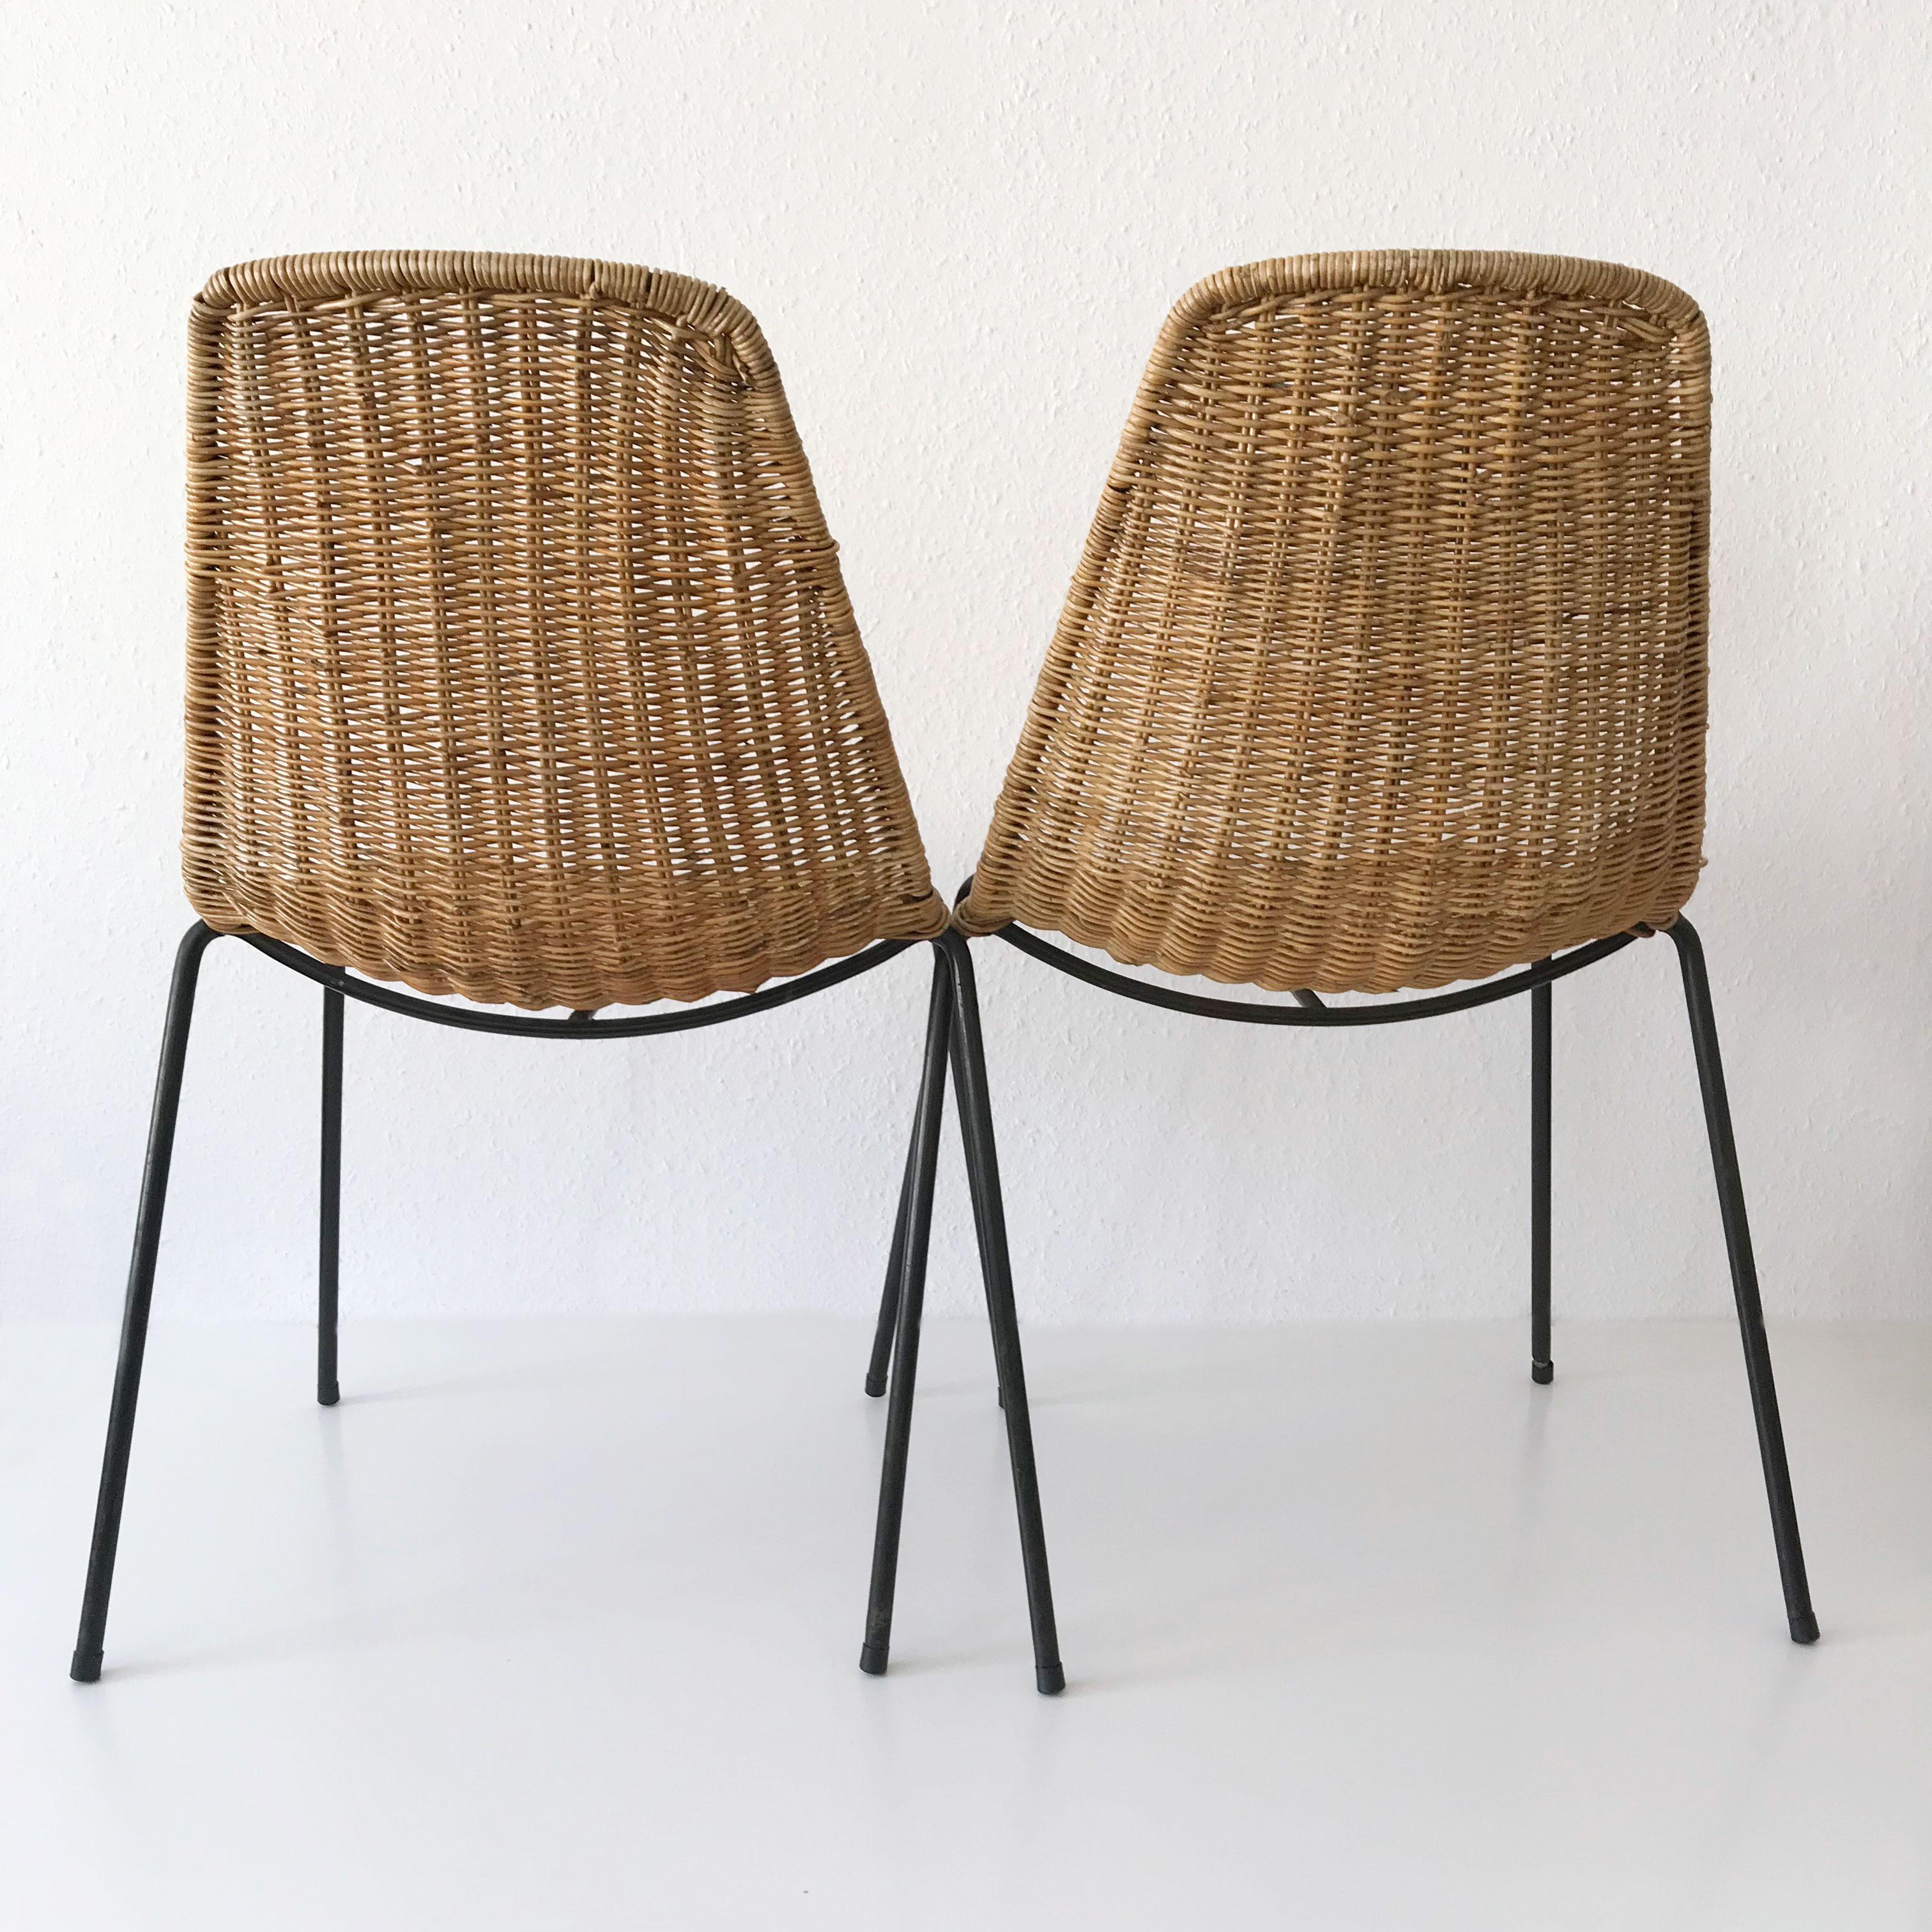 Set of Two Basket Chairs and Stool by Gian Franco Legler, 1951, Switzerland 1